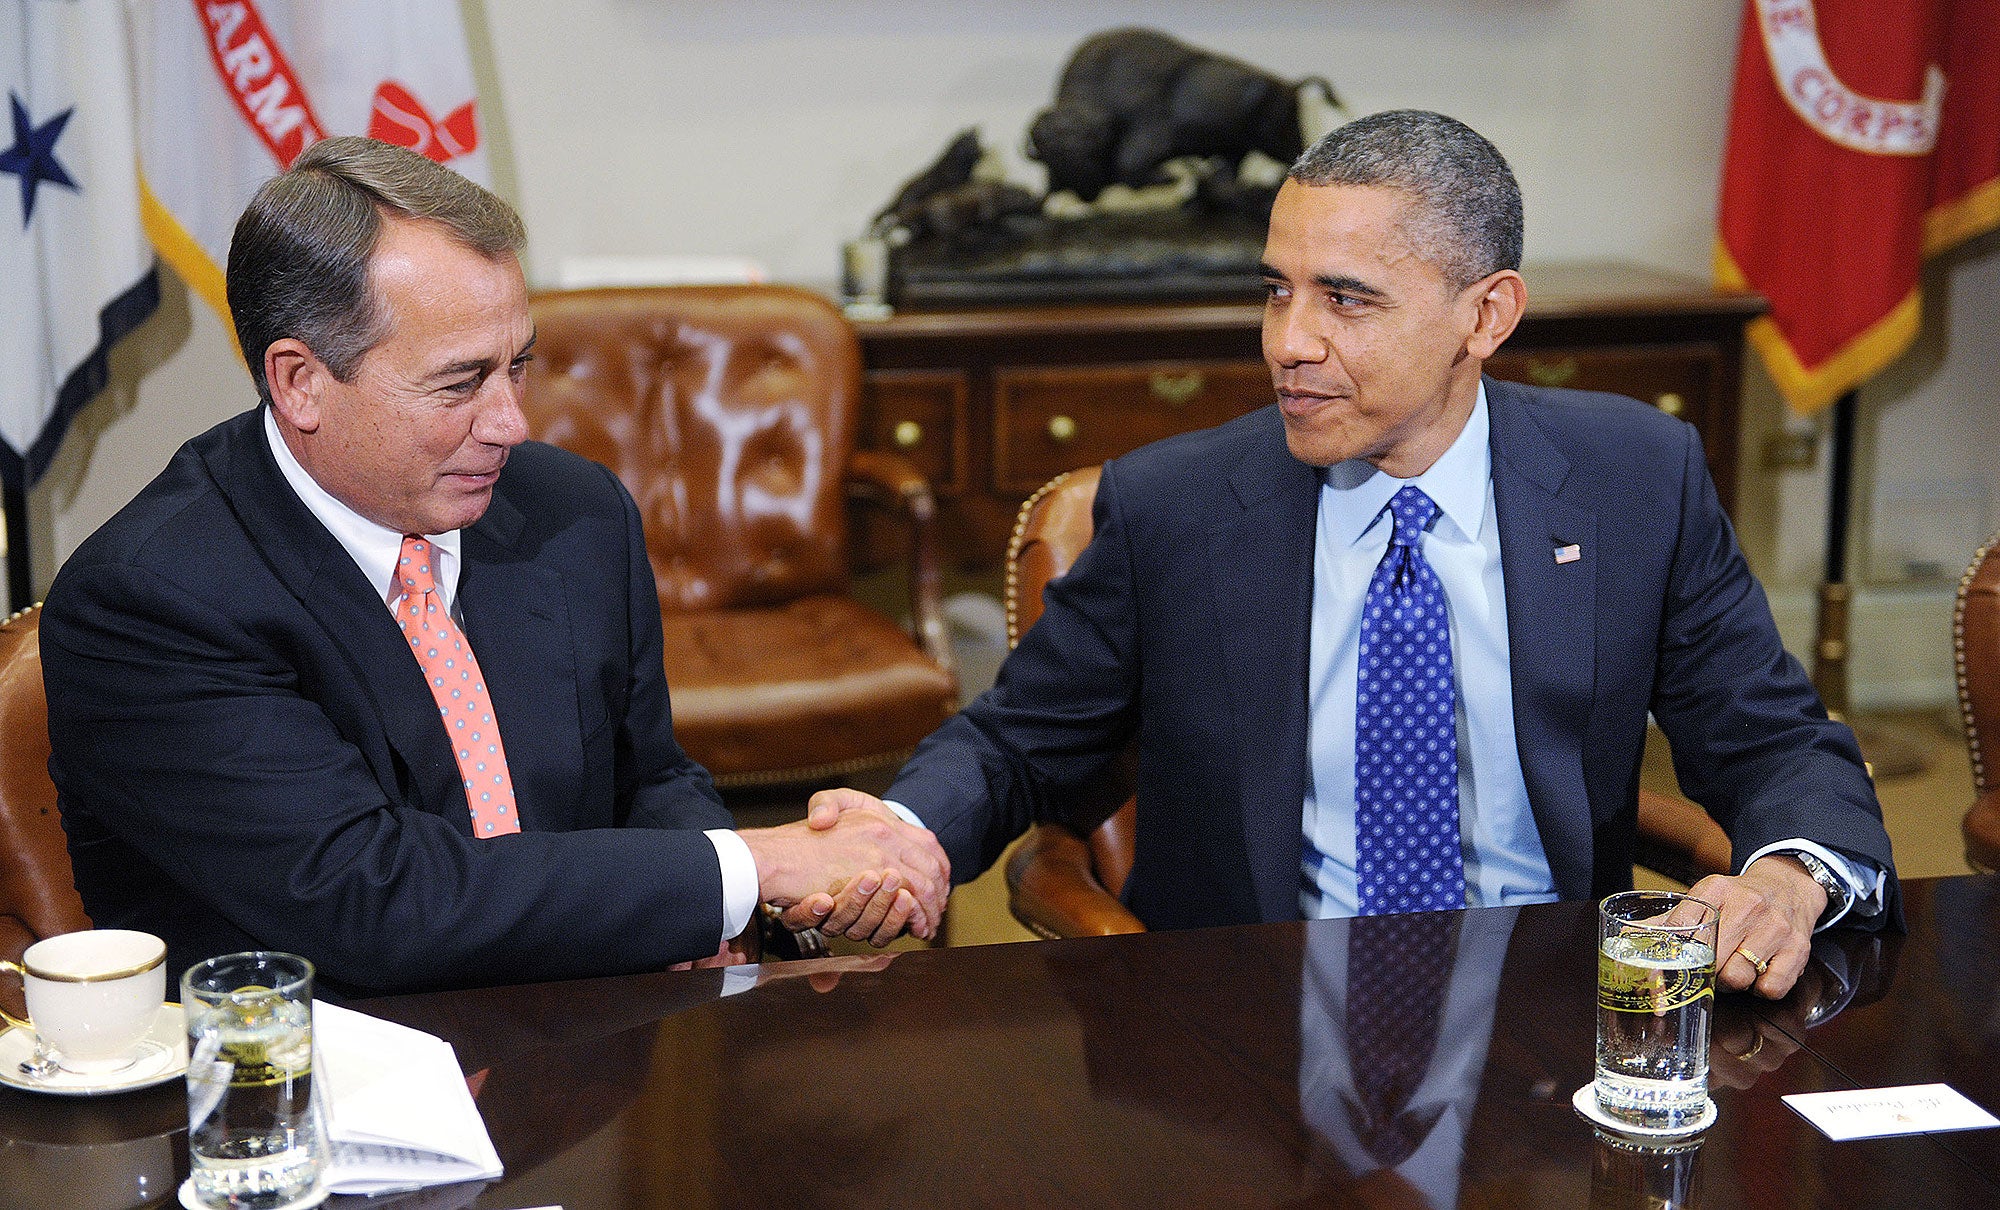 John Boehner On Why President Obama Never Snuck Cigarettes: 'He's Scared To Death Of His Wife'
